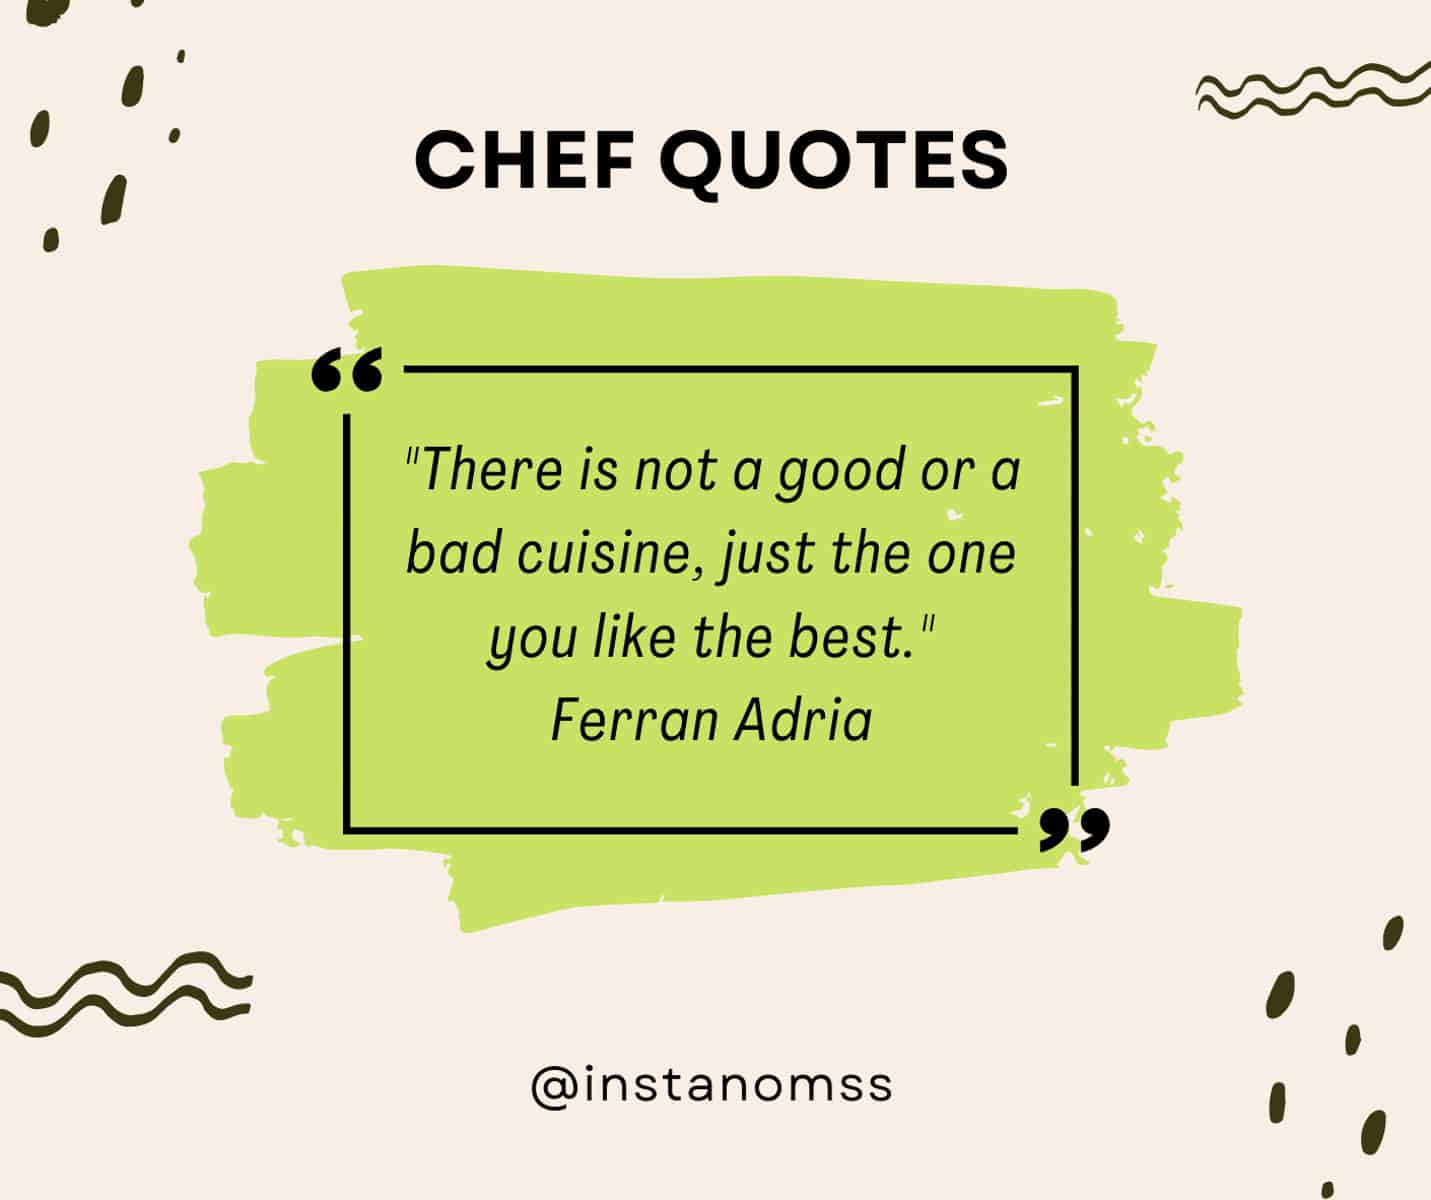 "There is not a good or a bad cuisine, just the one you like the best." Ferran Adria